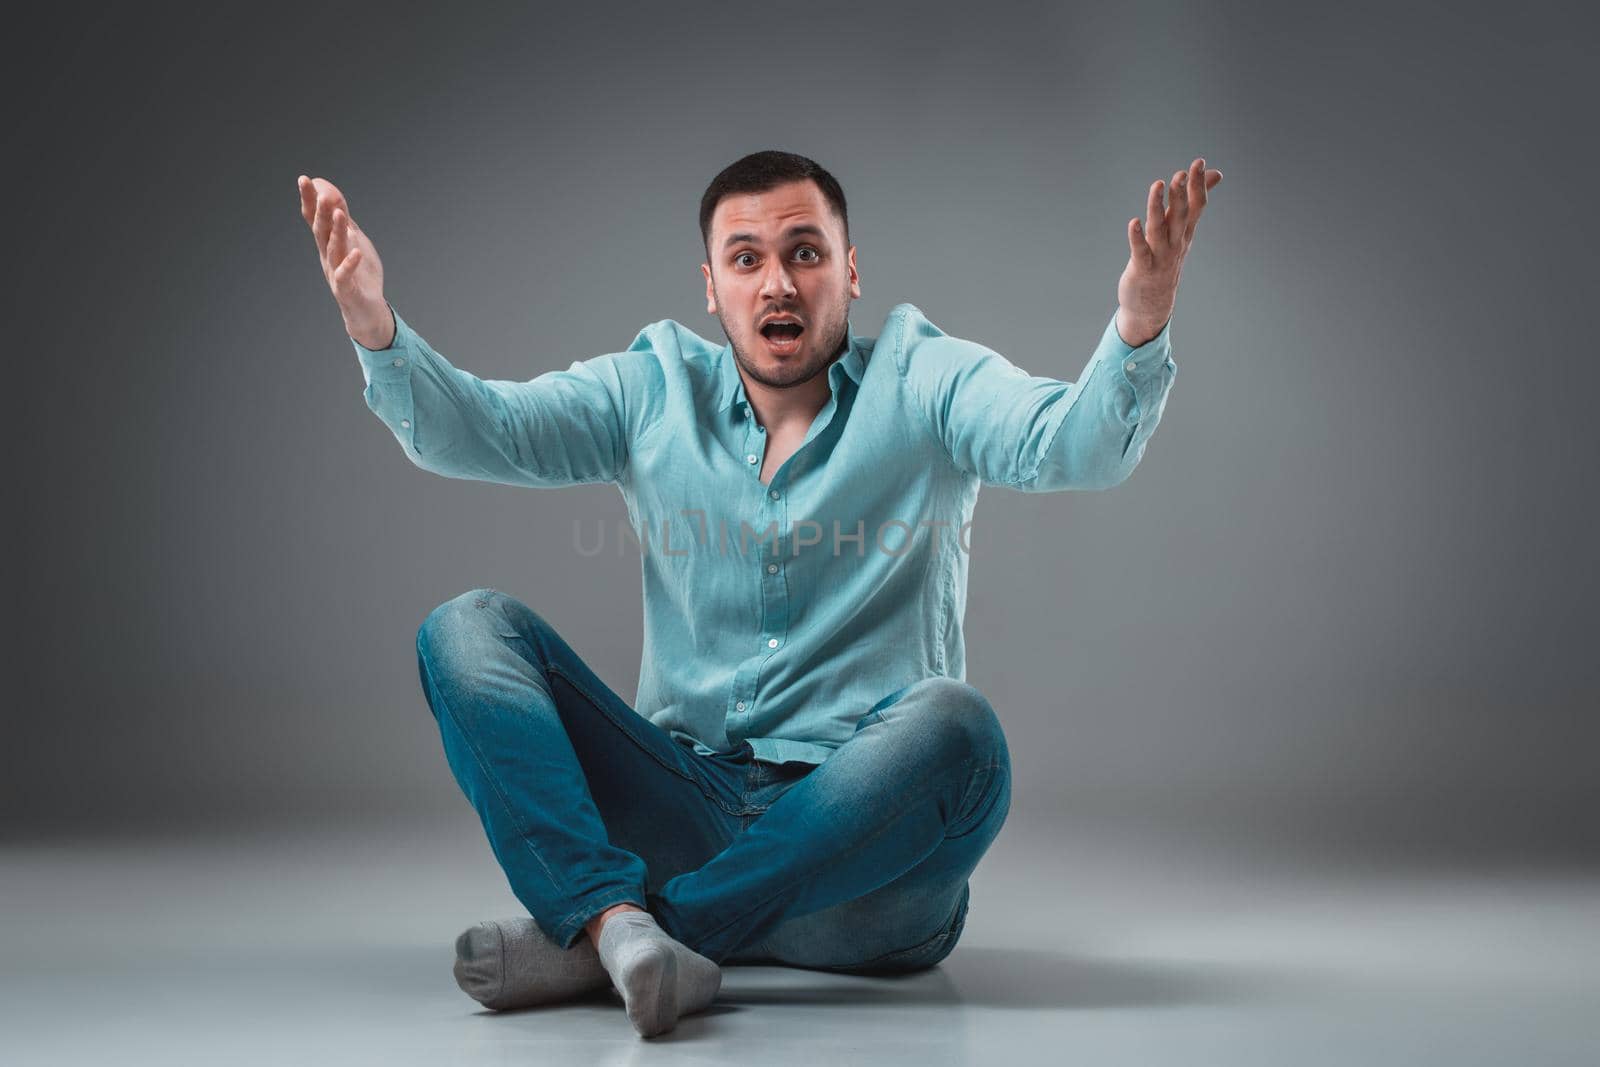 Handsome young man sitting on a floor with raised hands, isolated on gray background. Emotion concept